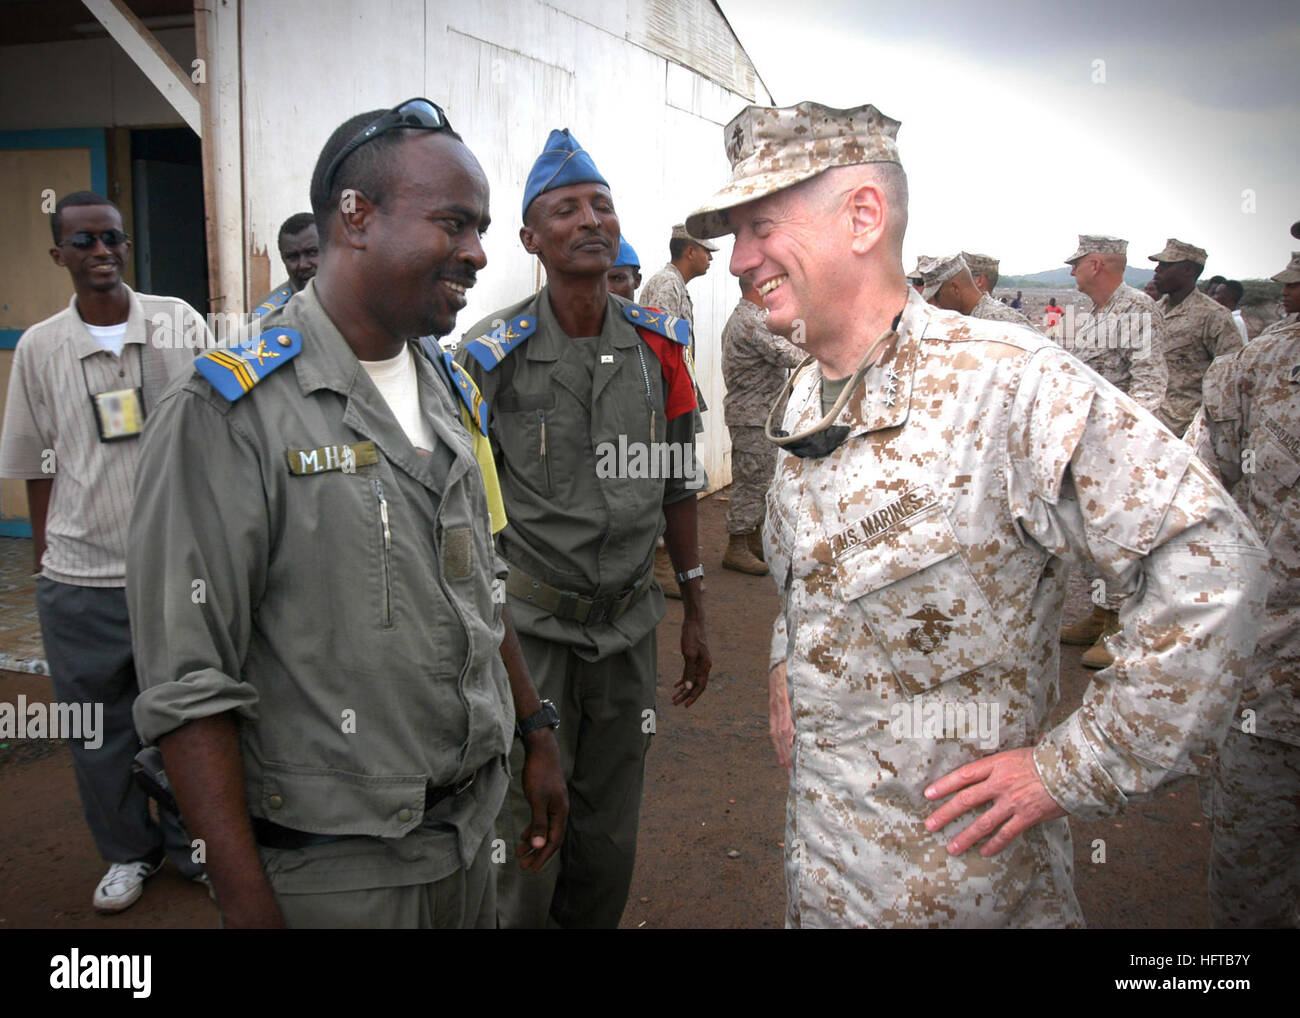 061205-N-1328C-343 - Douda, Djibouti (December 5, 2006) - (Right). U.S. Marine Corps Forces Central Commander, Lt. Gen. James Mattis visits with local officials from Douda, Djibouti, during Djibouti, home of the Combined Joint Task Force - Horn of Africa command. Combined Joint Task Force-Horn of Africa is a unit of United States Central Command. The organization's mission is to prevent conflict, promote regional stability and protect Coalition interests in order to prevail against extremism. More than 1,500 people from each branch of the U.S. military, civilian employees, Coalition forces and Stock Photo